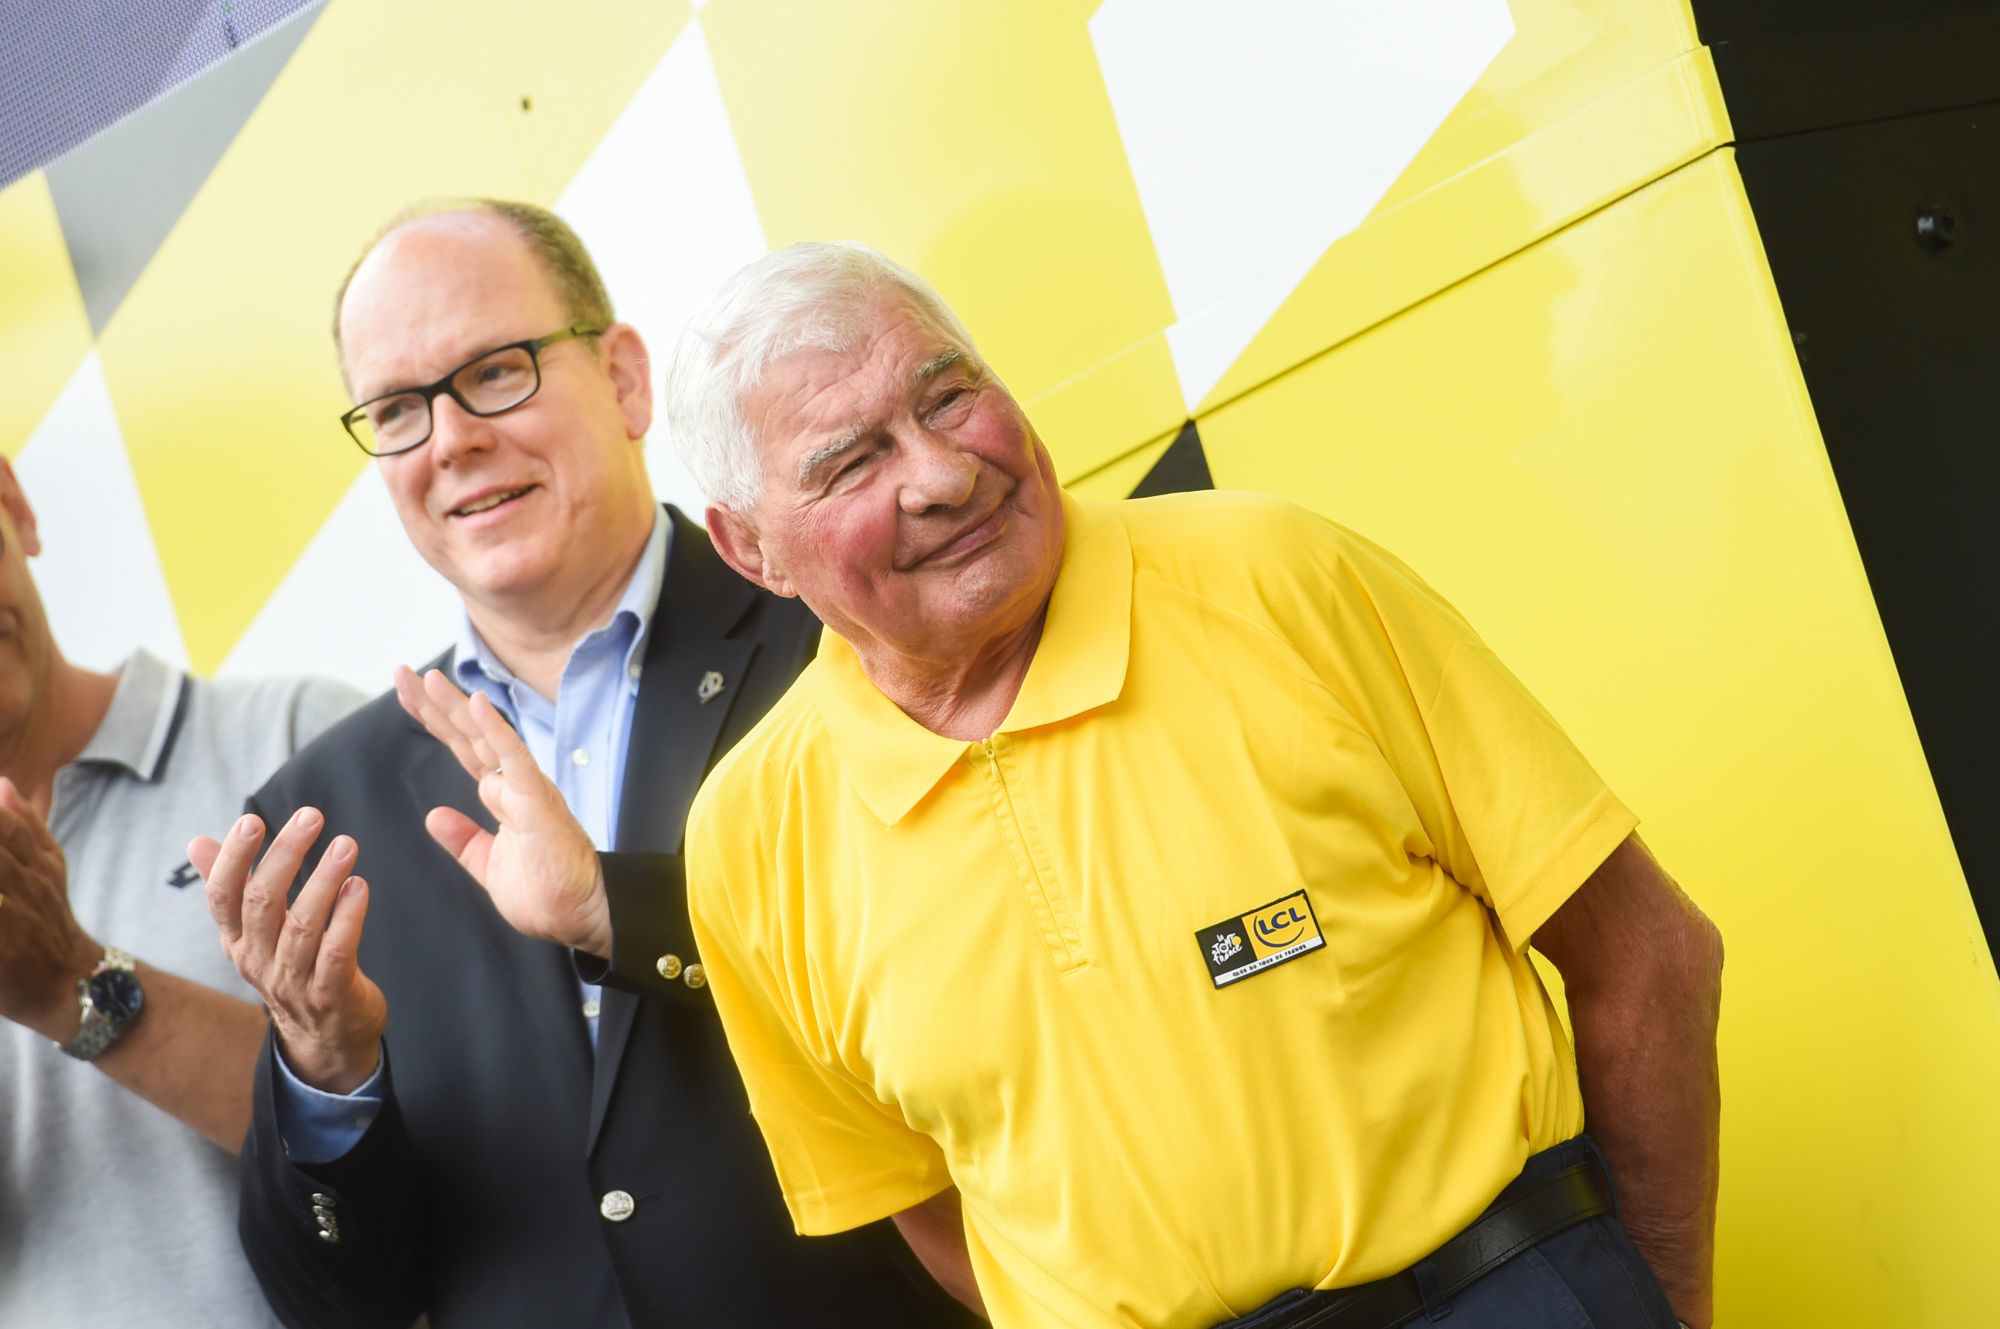 Prince Albert De Monaco  and Raymond Poulidor during Stage 1 of Tour de France (Brussels-Brussels), on July 6th, 2019.
Photo : Sirotti / Icon Sport